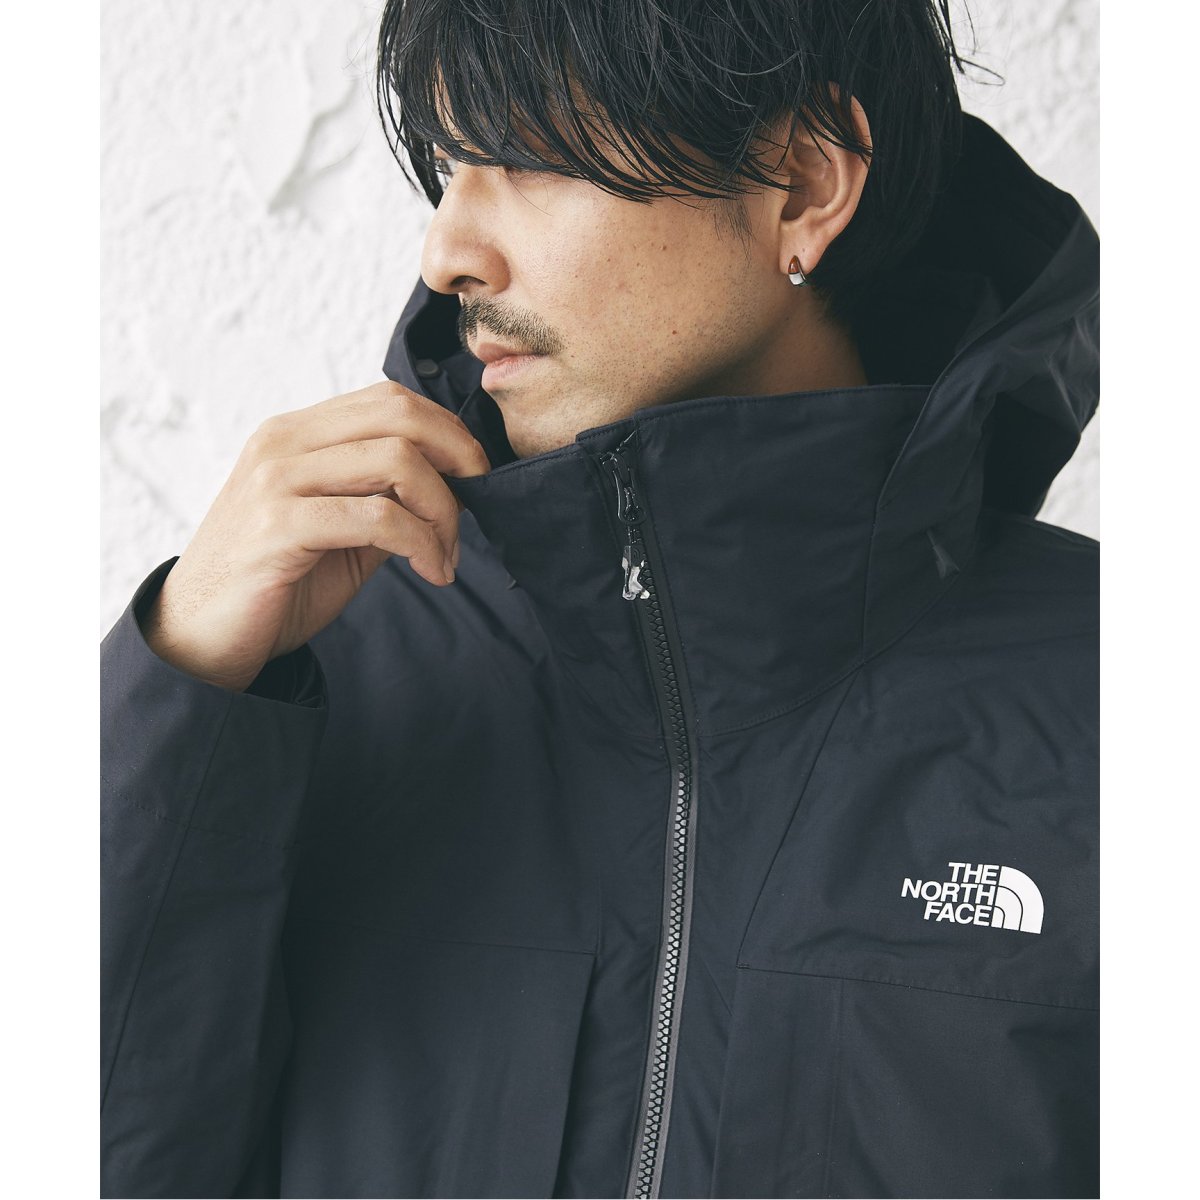 THE NORTH FACE】ストームピーク トリクライメイト ジャケット